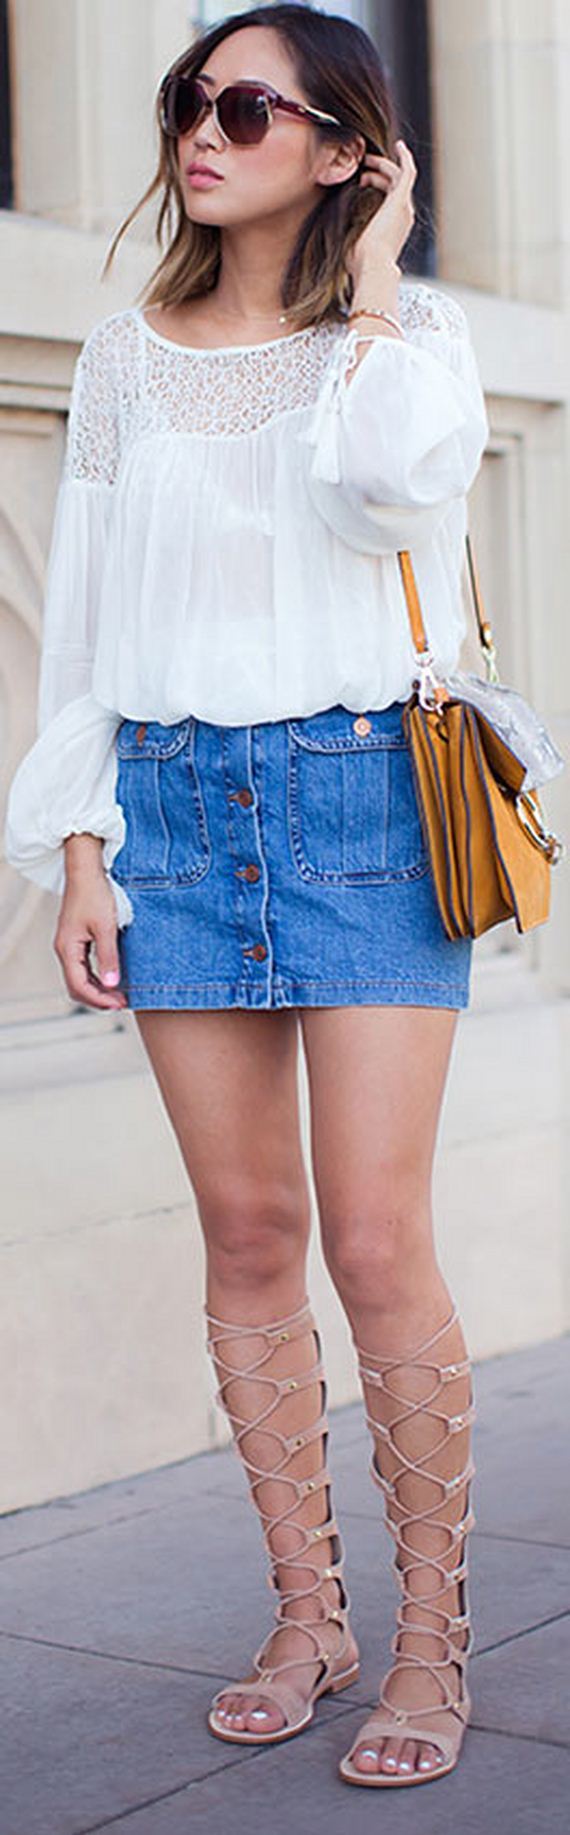 21-Cute-Summer-Outfits